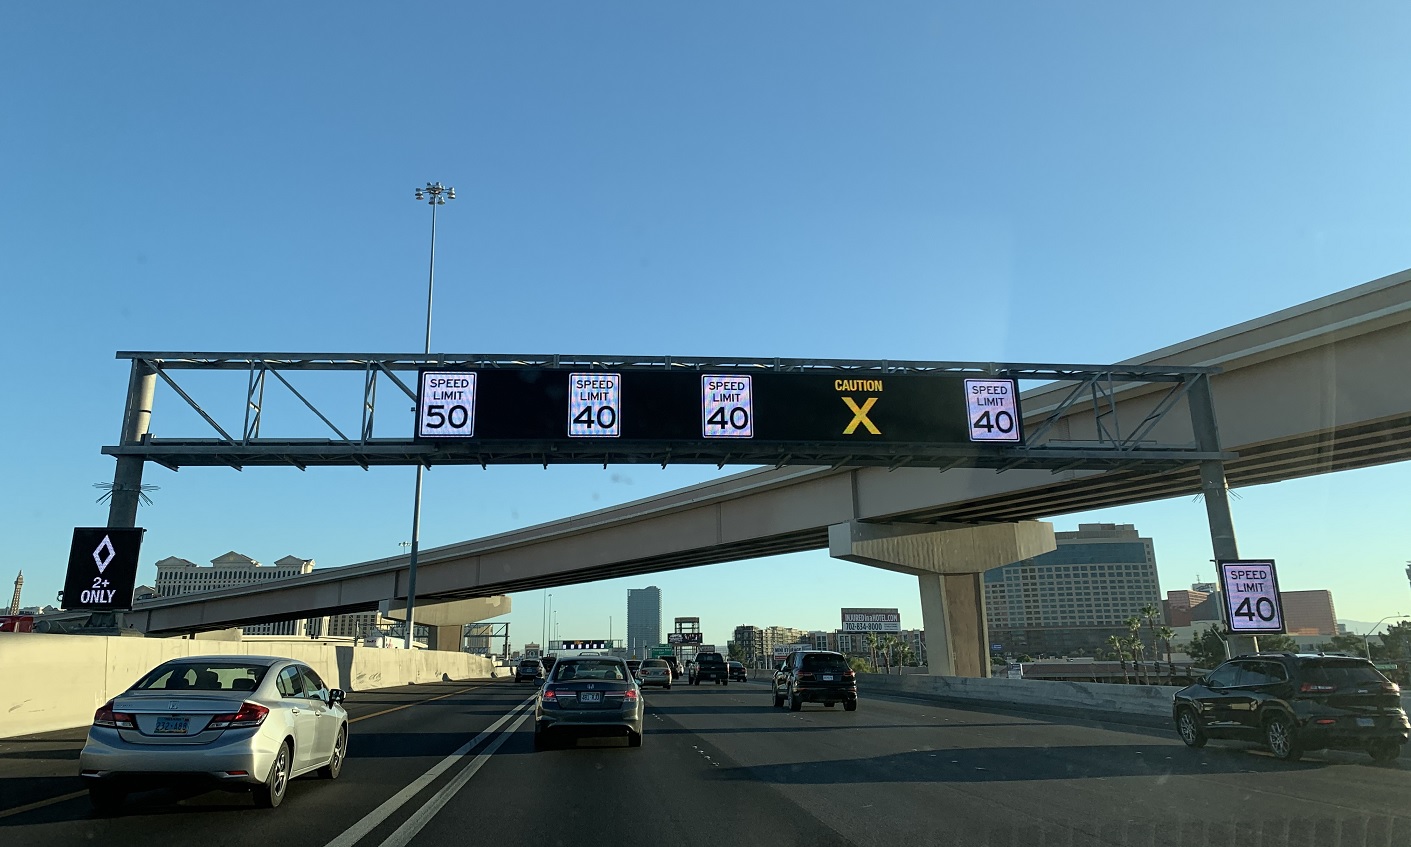 South Nevada RTC says the corridor will have overhead signs that warn drivers about speed reduction and lane closures (Credit – RTC)